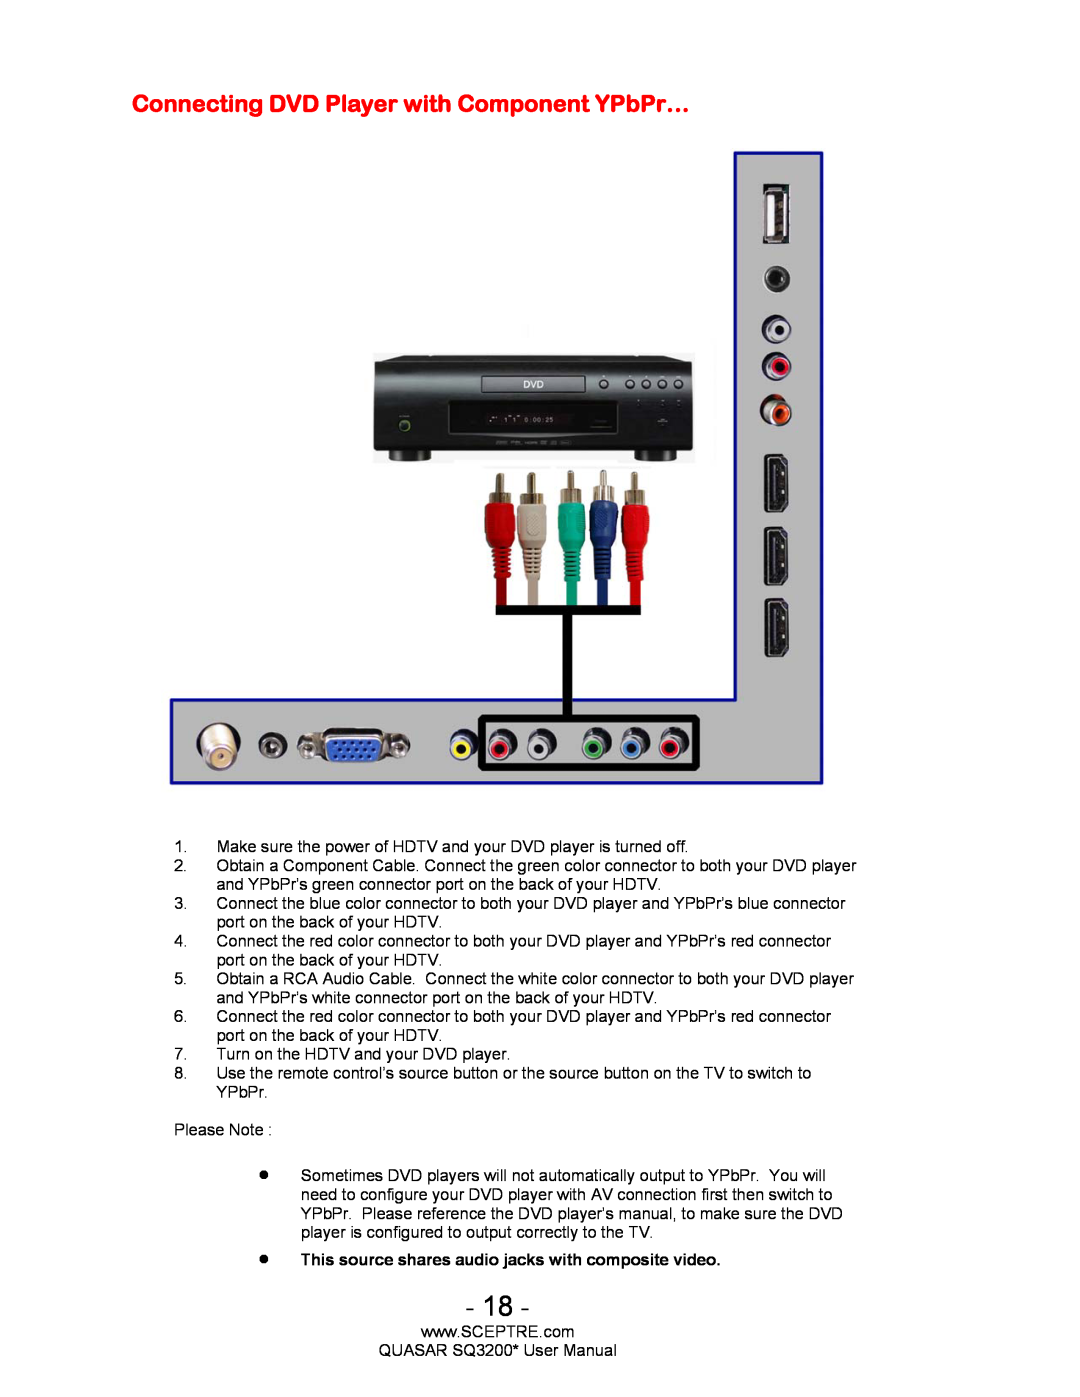 Sceptre Technologies HDTV Connecting DVD Player with Component YPbPr…, This source shares audio jacks with composite video 